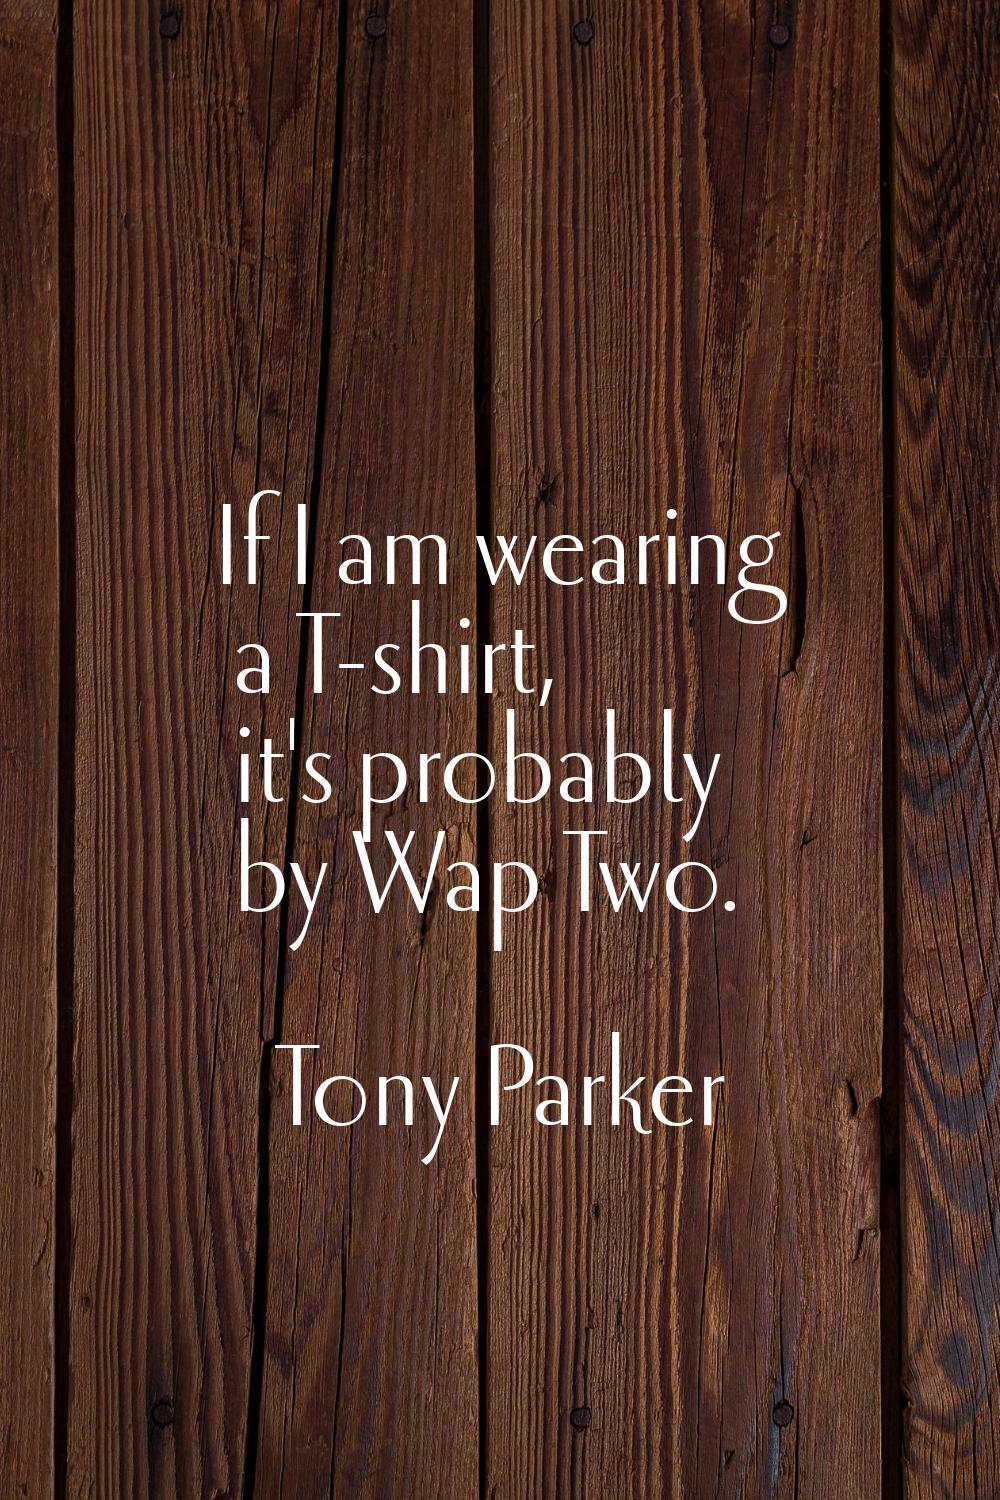 If I am wearing a T-shirt, it's probably by Wap Two.